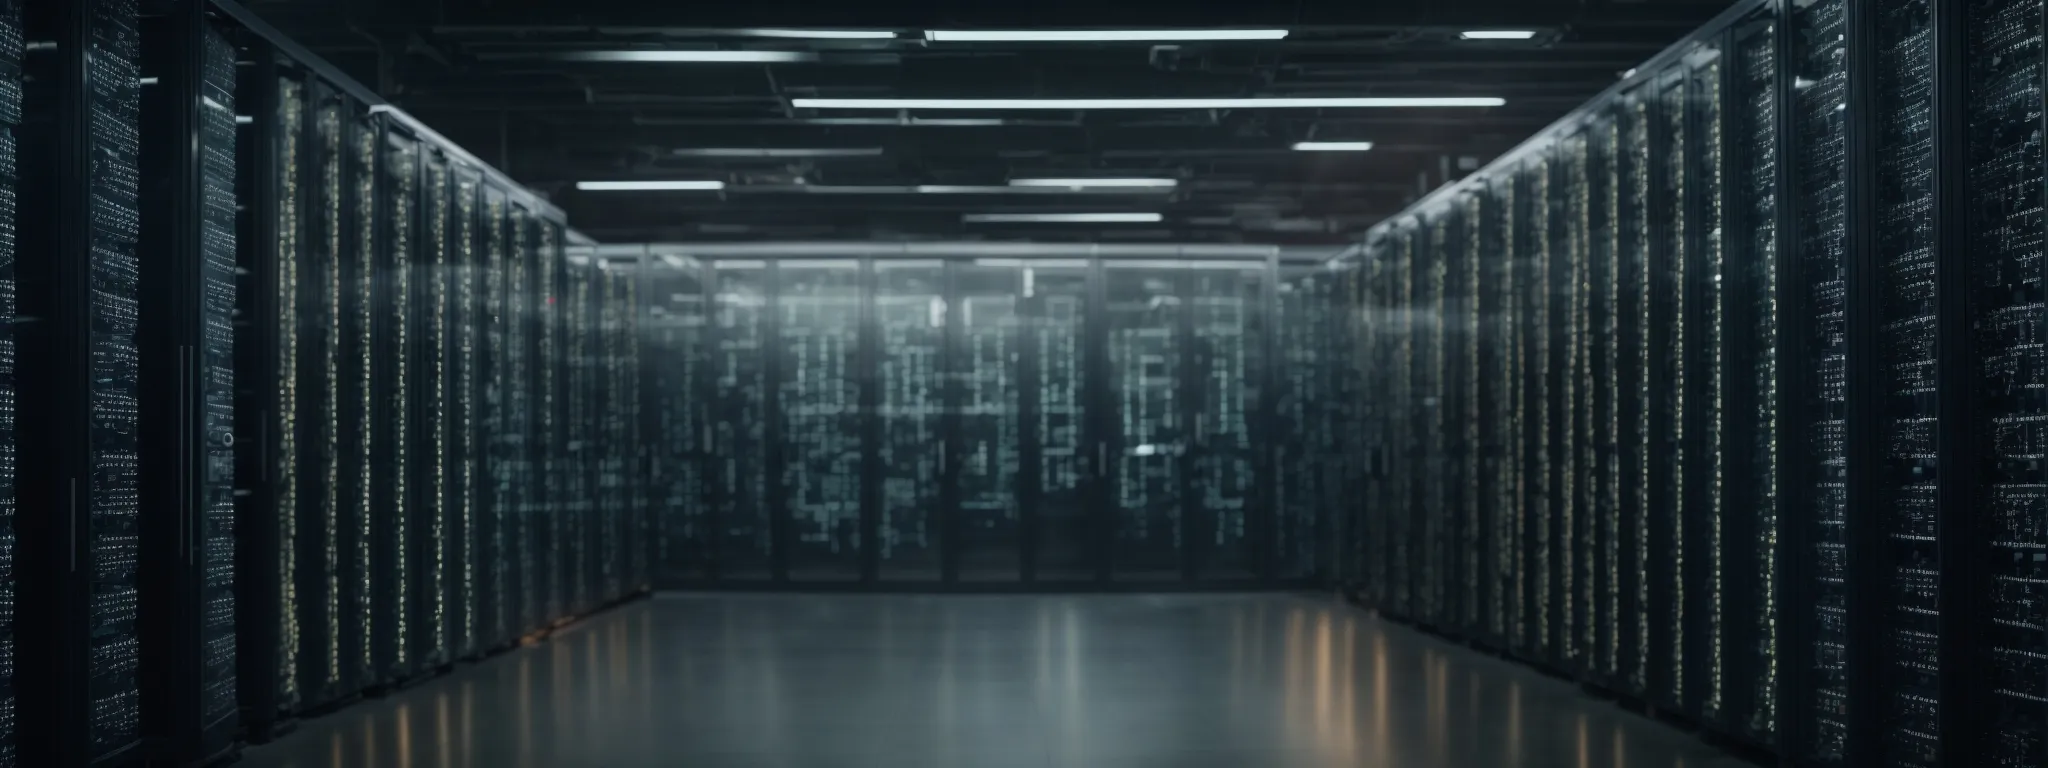 a matrix of secure, locked vaults representing data storage in a high-tech room to symbolize the safeguarding of digital information.